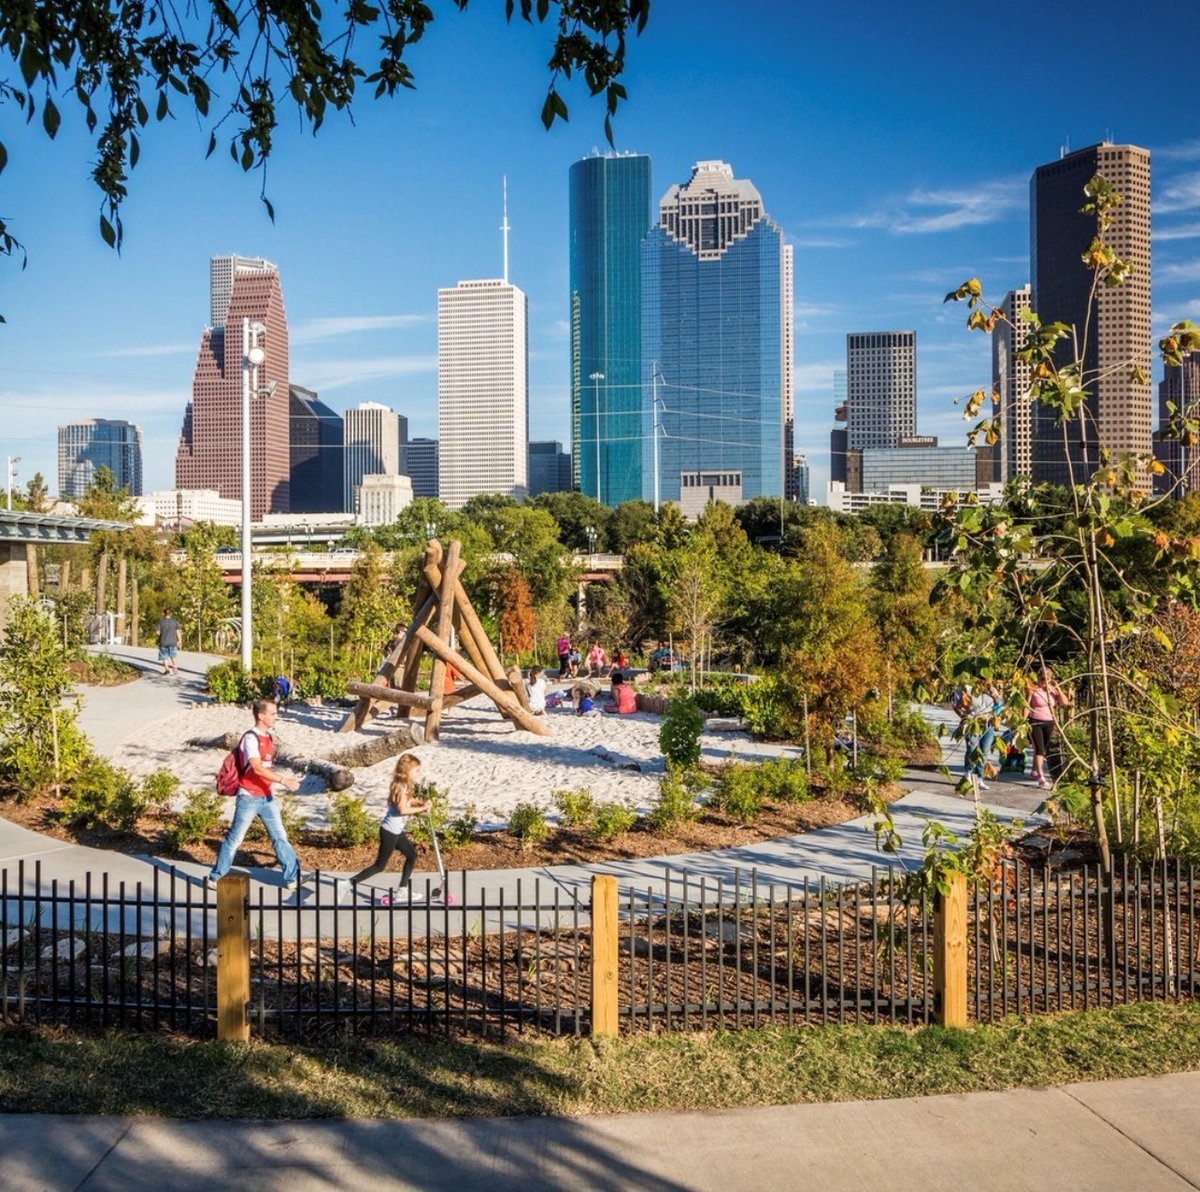 The Barbara Fish Daniel Nature Play Area and Picnic Pavilion is one of @buffalobayou park's most popular destinations 🌳☀ The play area features: a boulder rock scramble, climbing logs and stones, a 33-foot slide & more! #ExploreHou 📍105 Sabine Street 📸@swa_houston